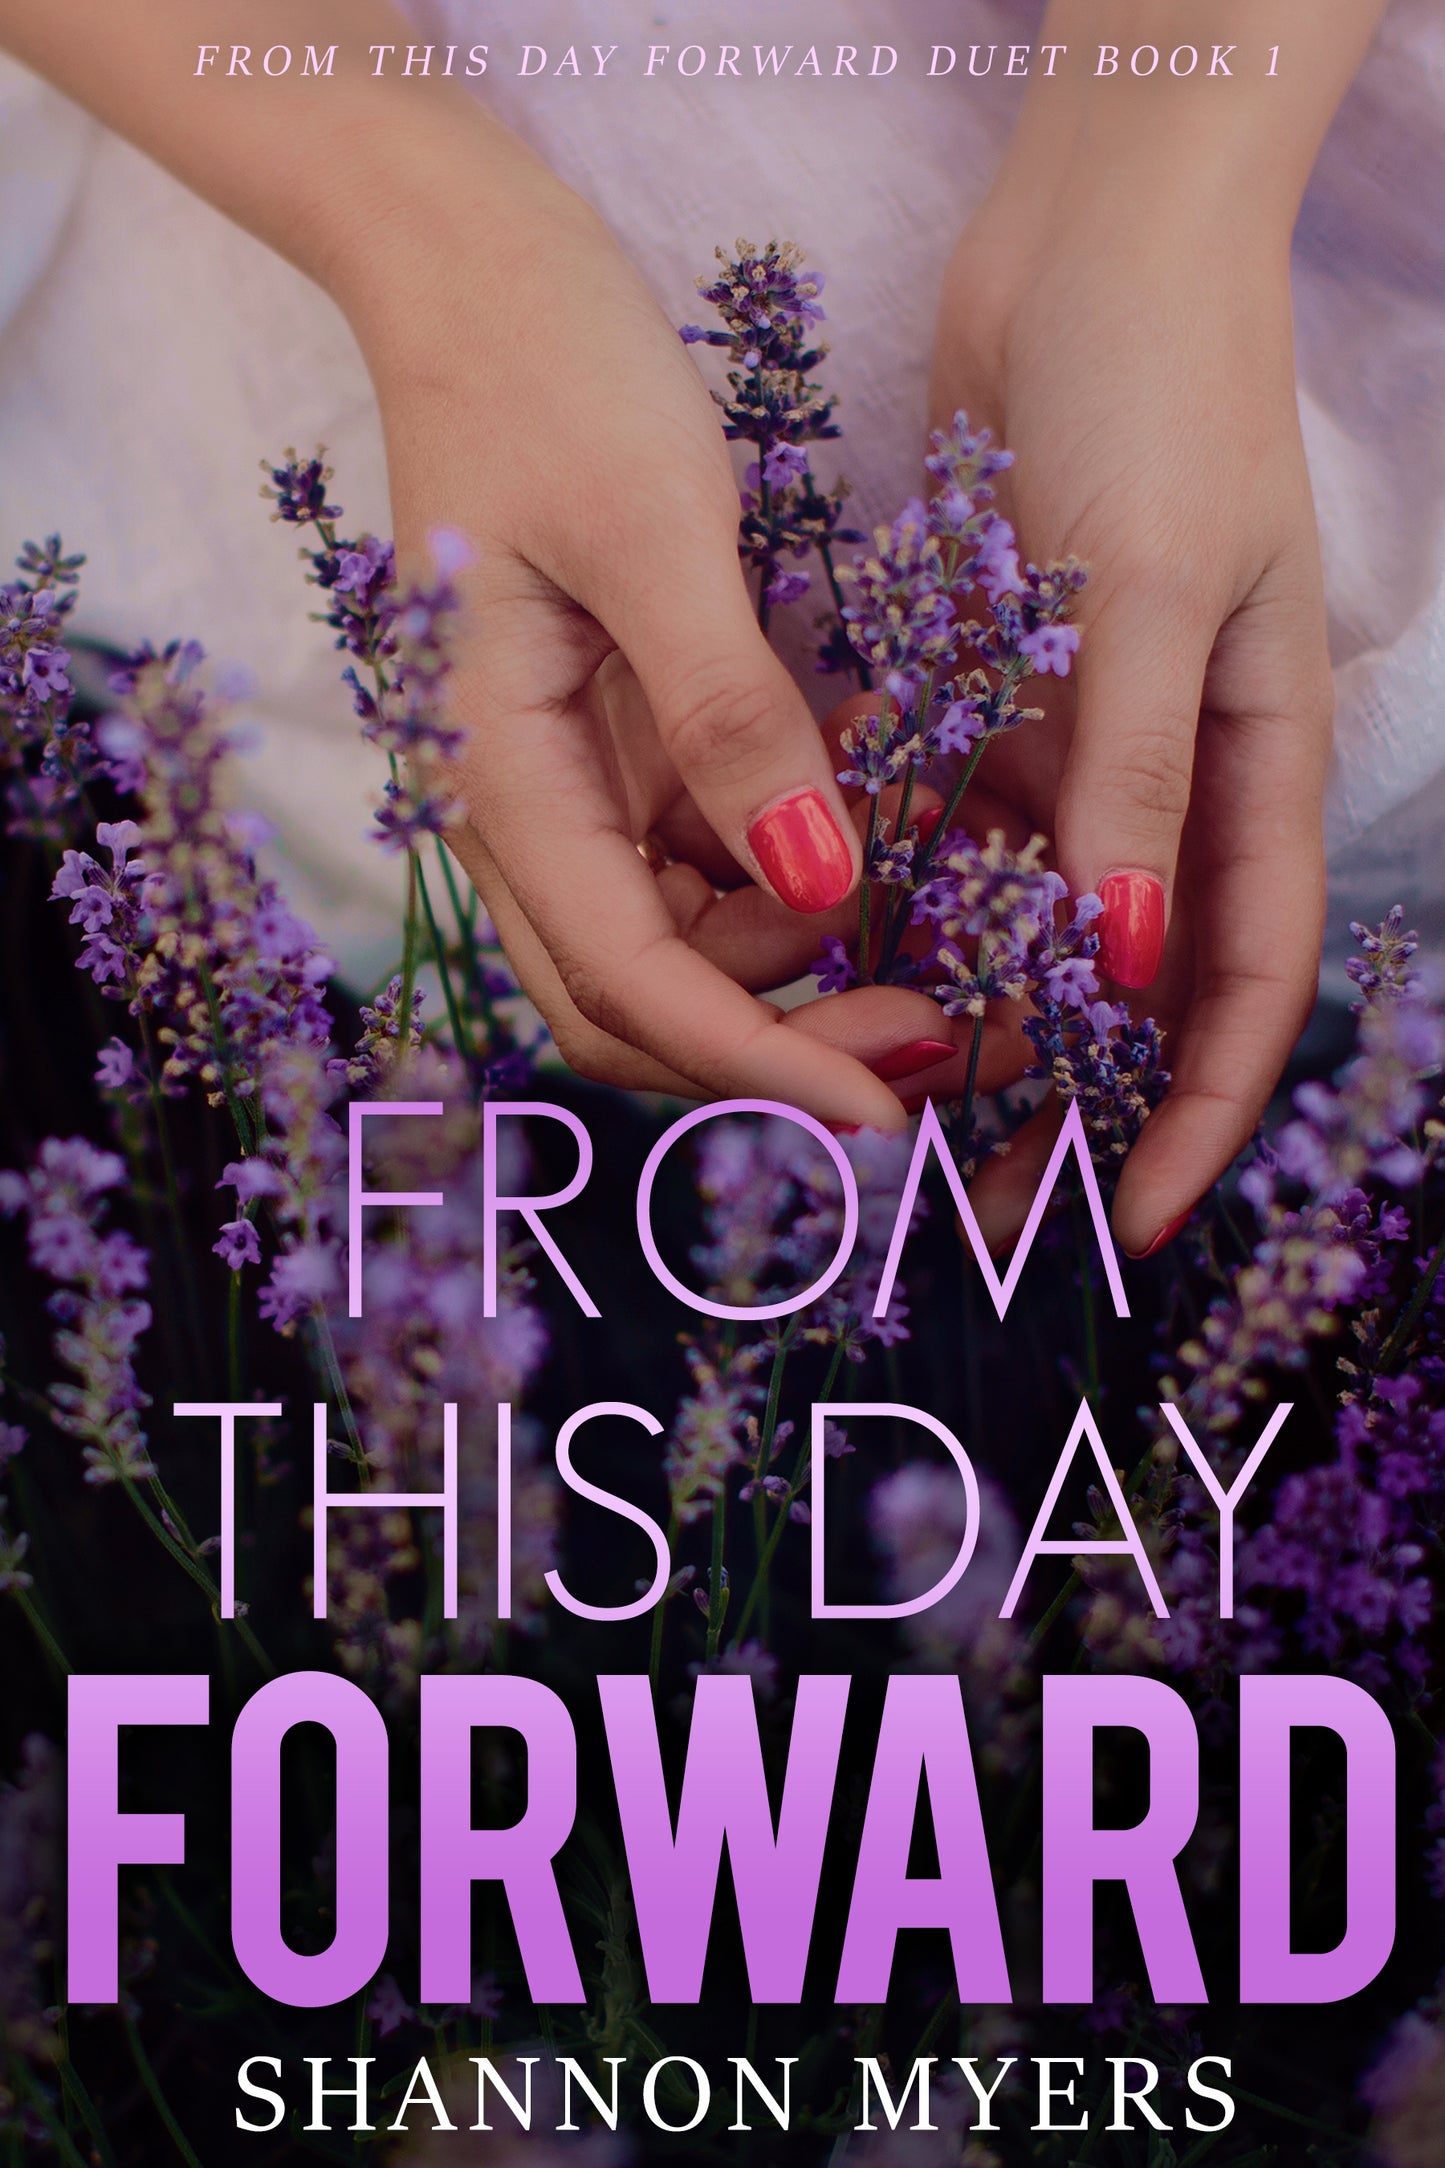 From This Day Forward (FTDF Duet: Book 1) Digital Book